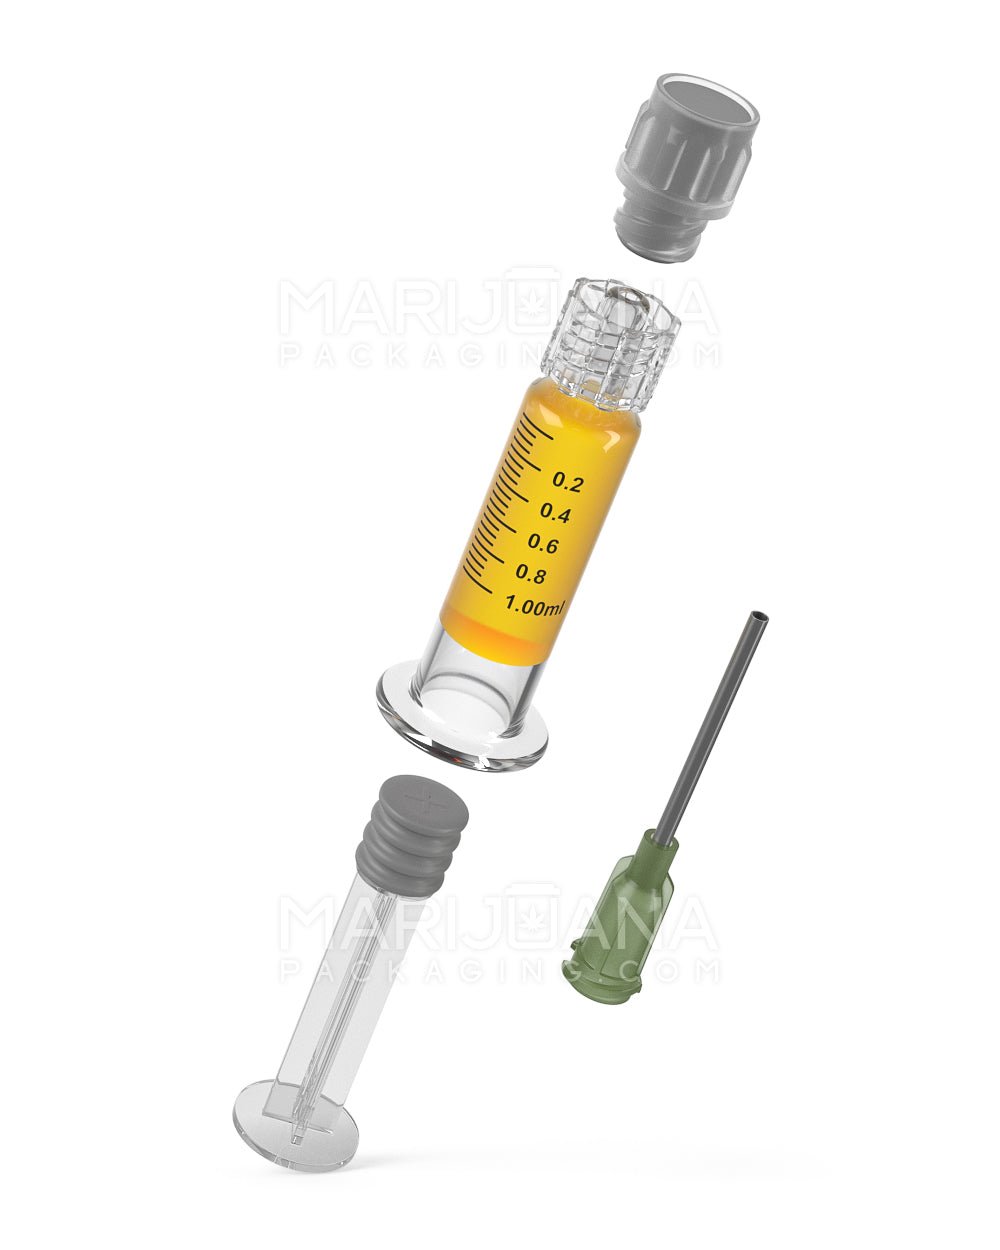 Luer Lock | Glass Dab Applicator Syringes w/ Needle Tip | 1mL - 0.2mL Increments - 100 Count - 7